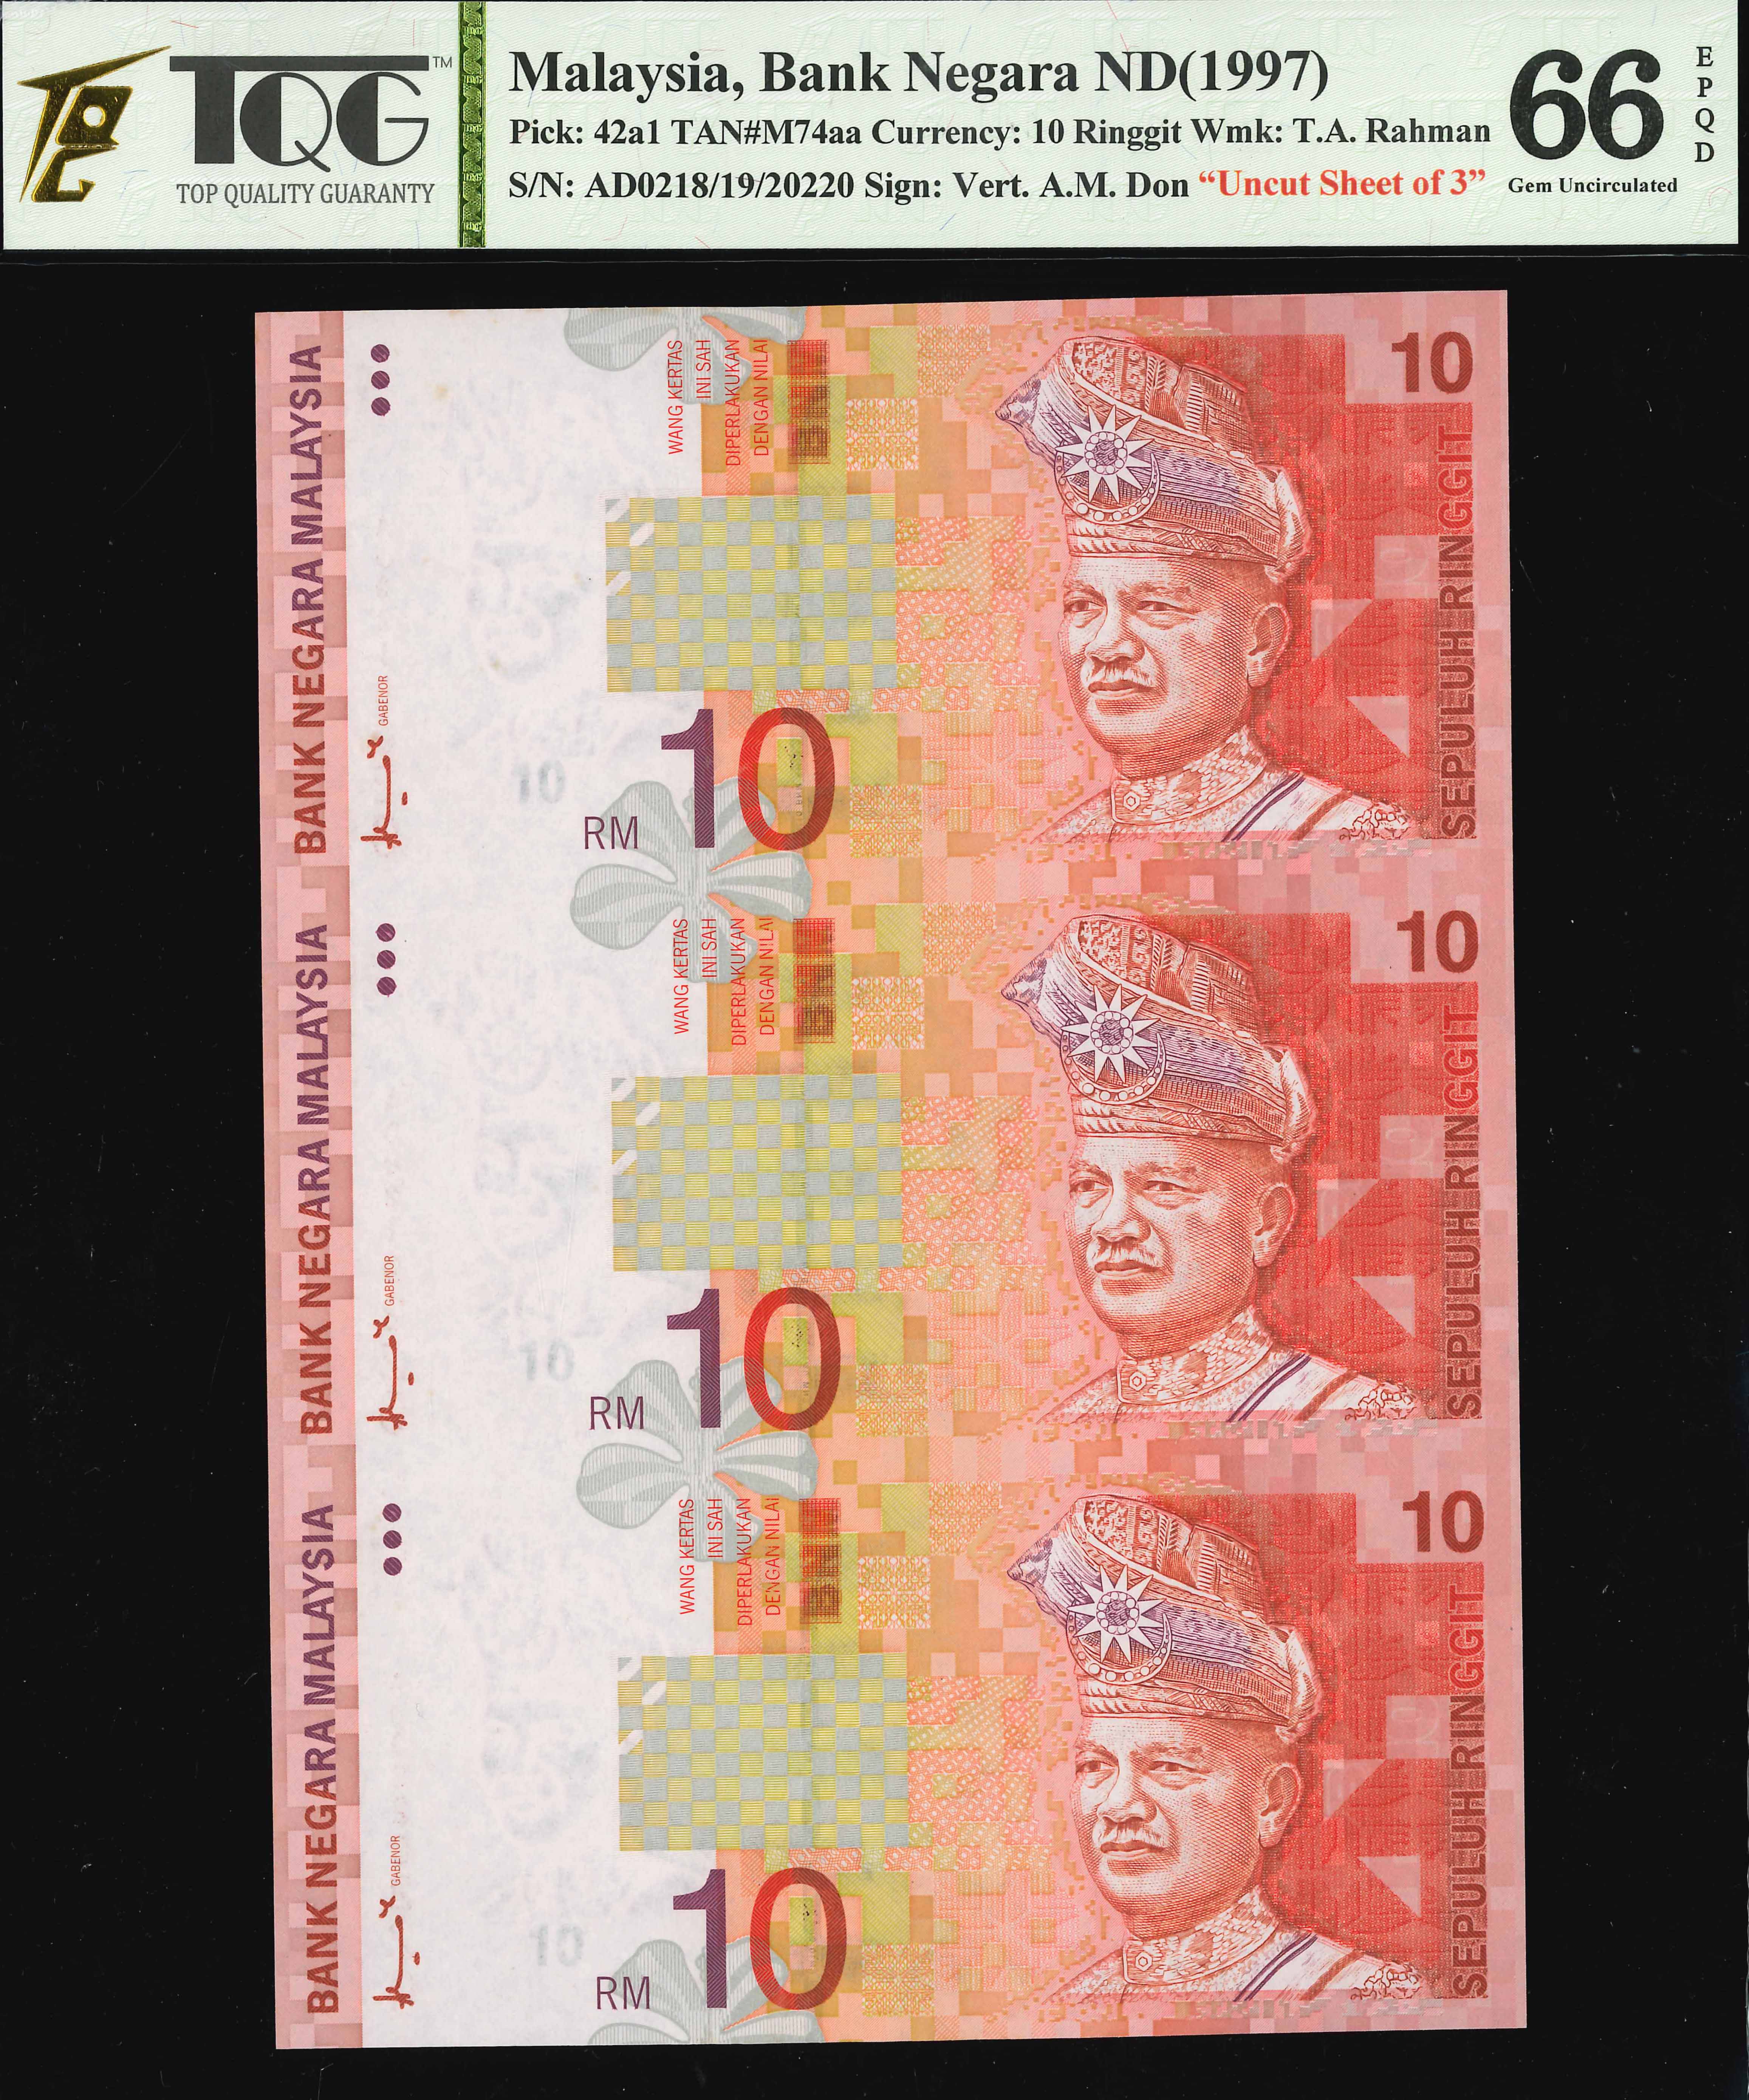 Malaysia, 8th series, 1997, 10 Ringgit, P-42a1, S/N. AD 0218/19 